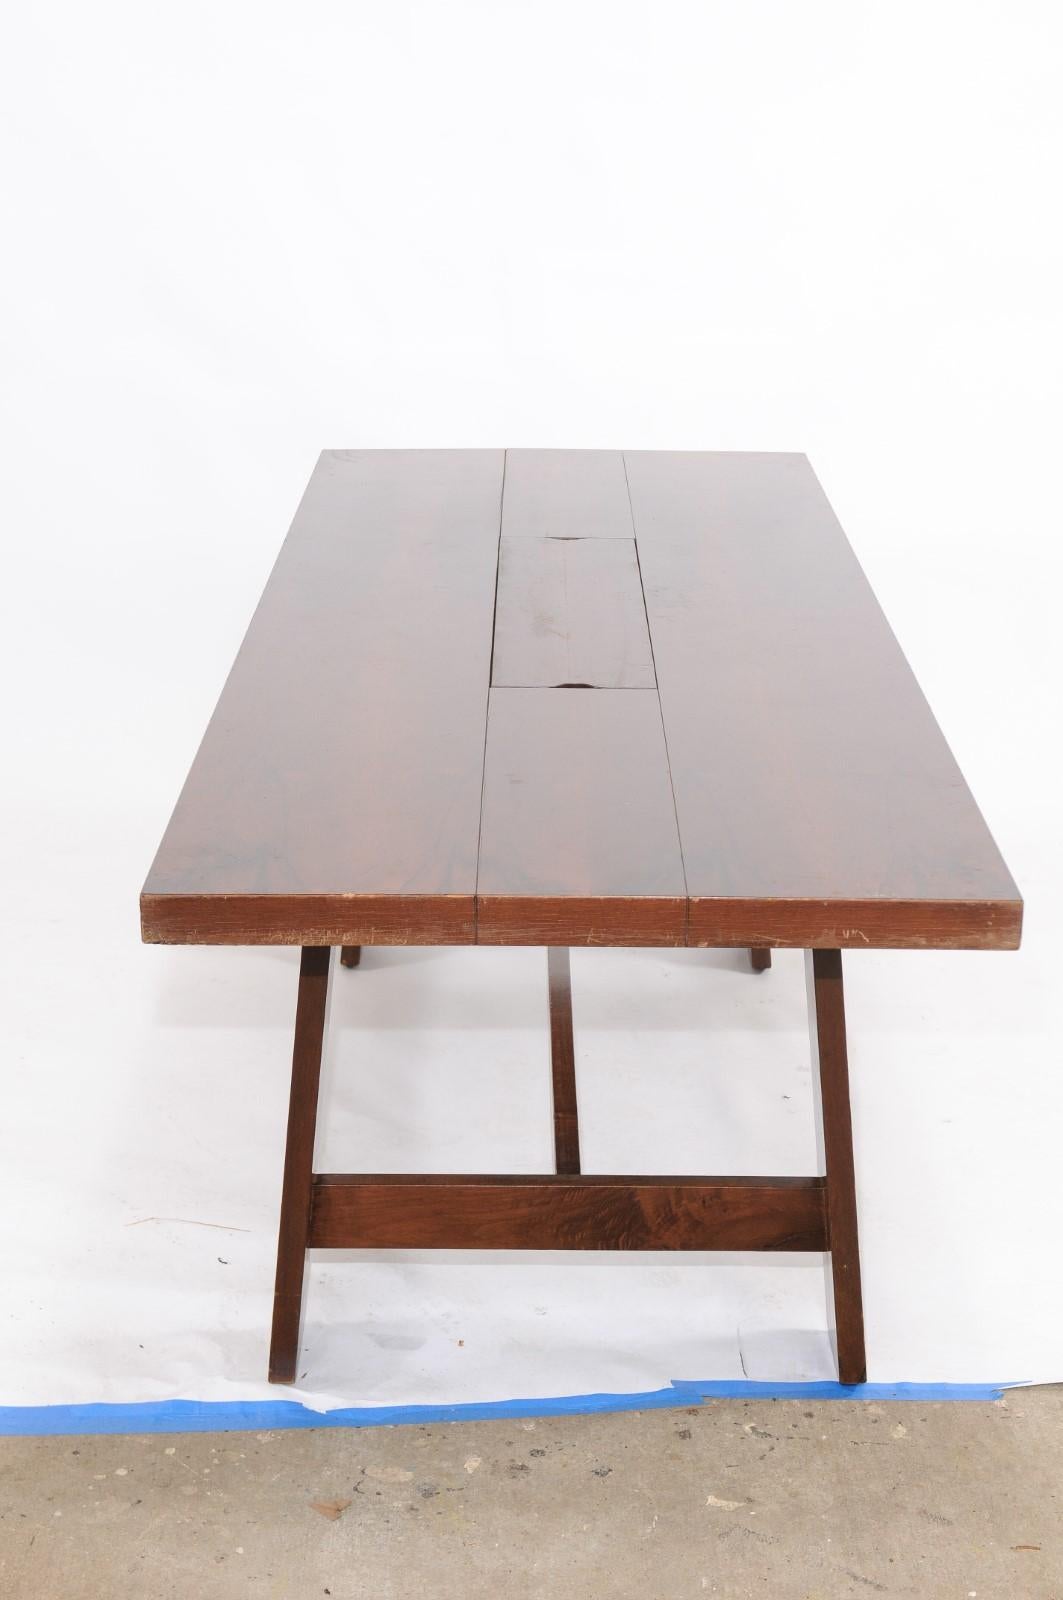 An Italian walnut veneer dining table designed by Silvio Coppola for Bernini in the 1960s. Born during the midcentury period, this handsome Italian walnut veneer dining table features a rectangular planked top with removable tray in the center,